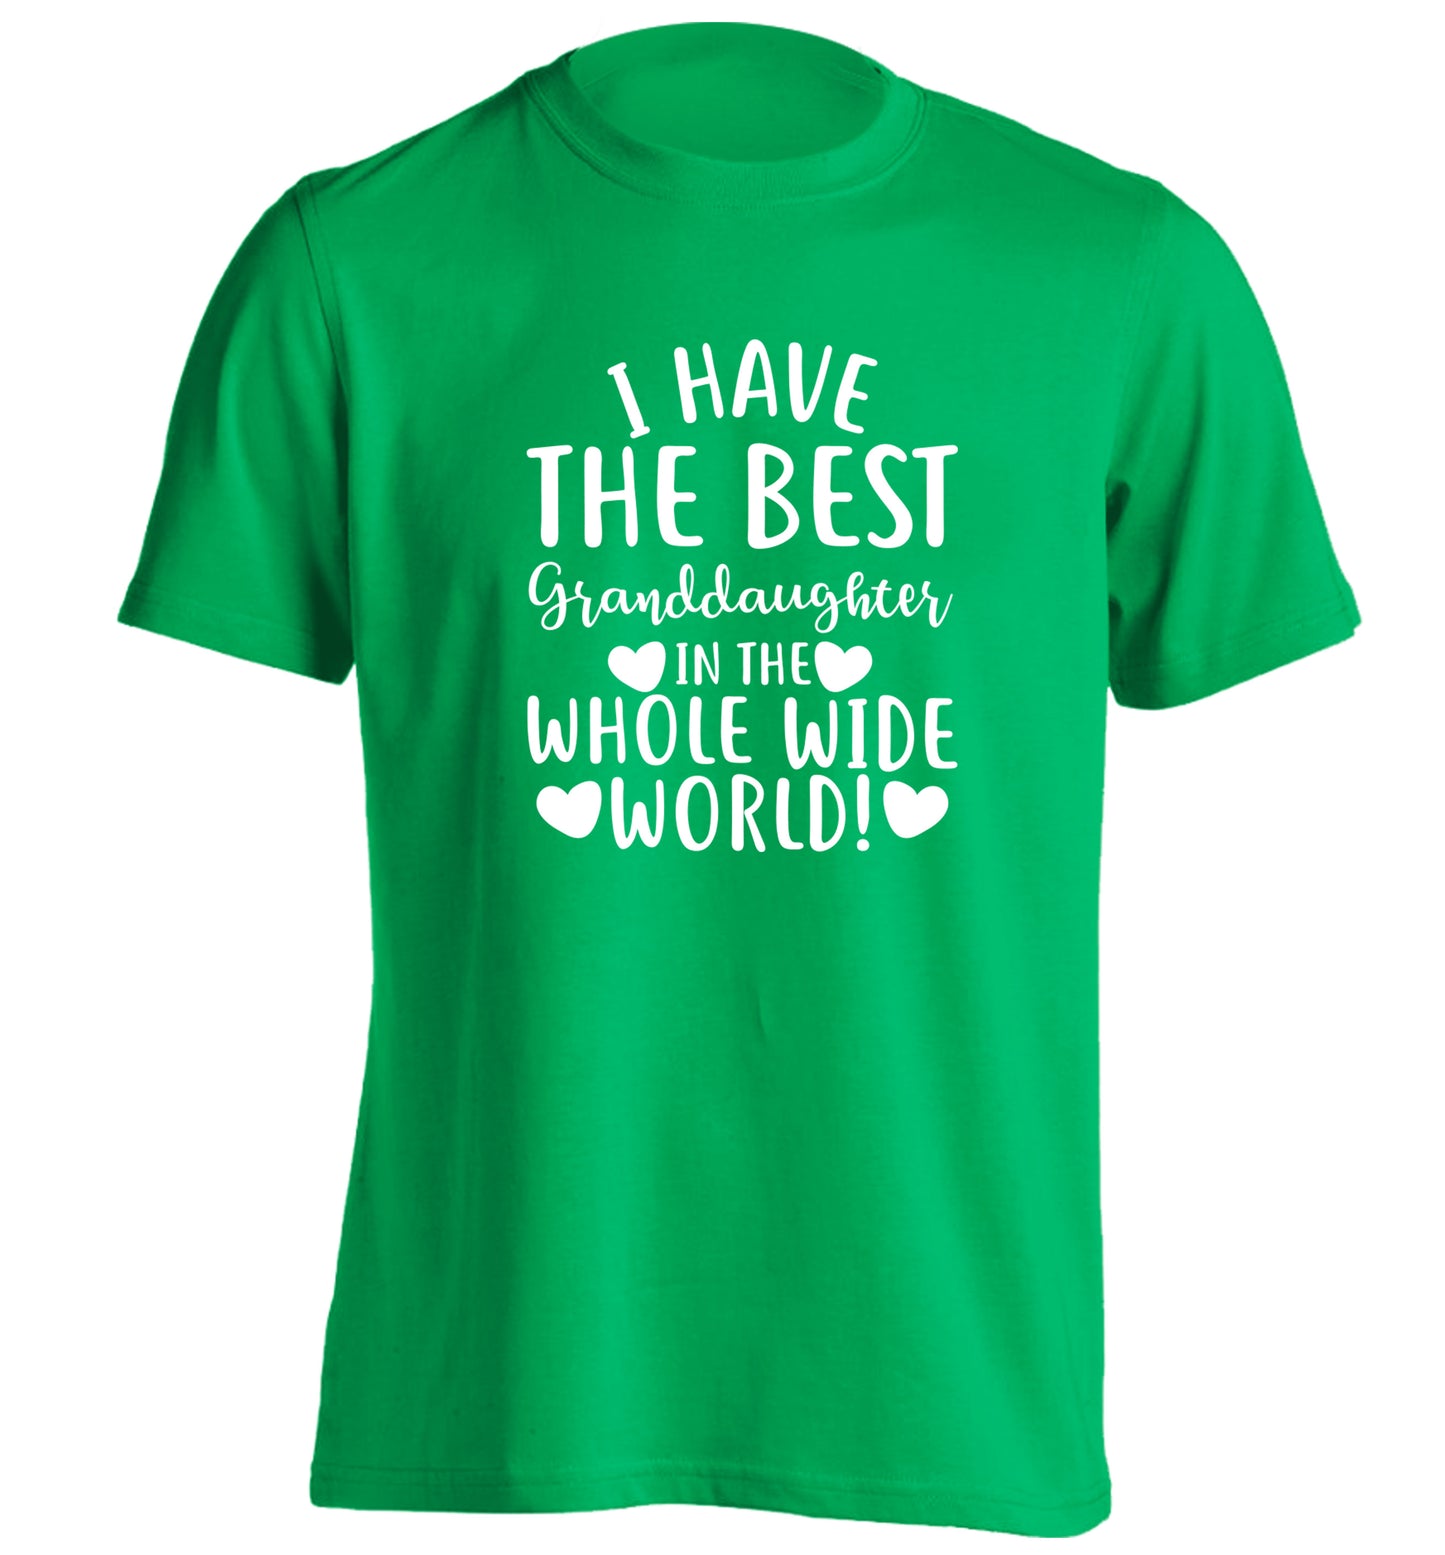 I have the best granddaughter in the whole wide world! adults unisex green Tshirt 2XL